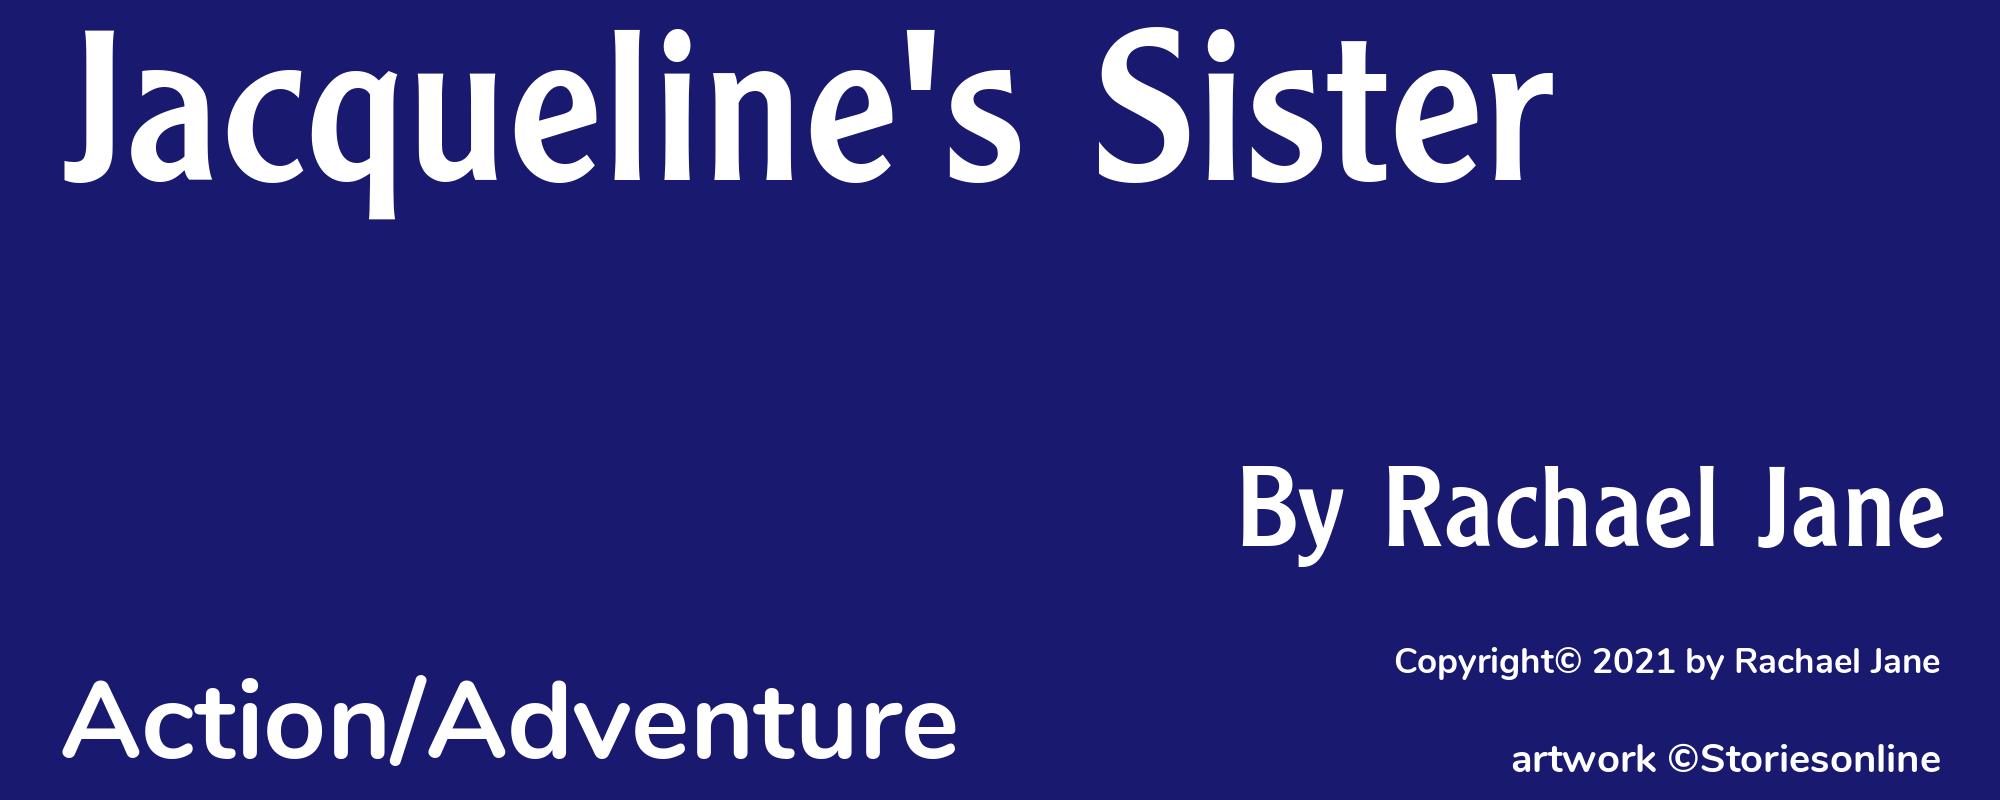 Jacqueline's Sister - Cover